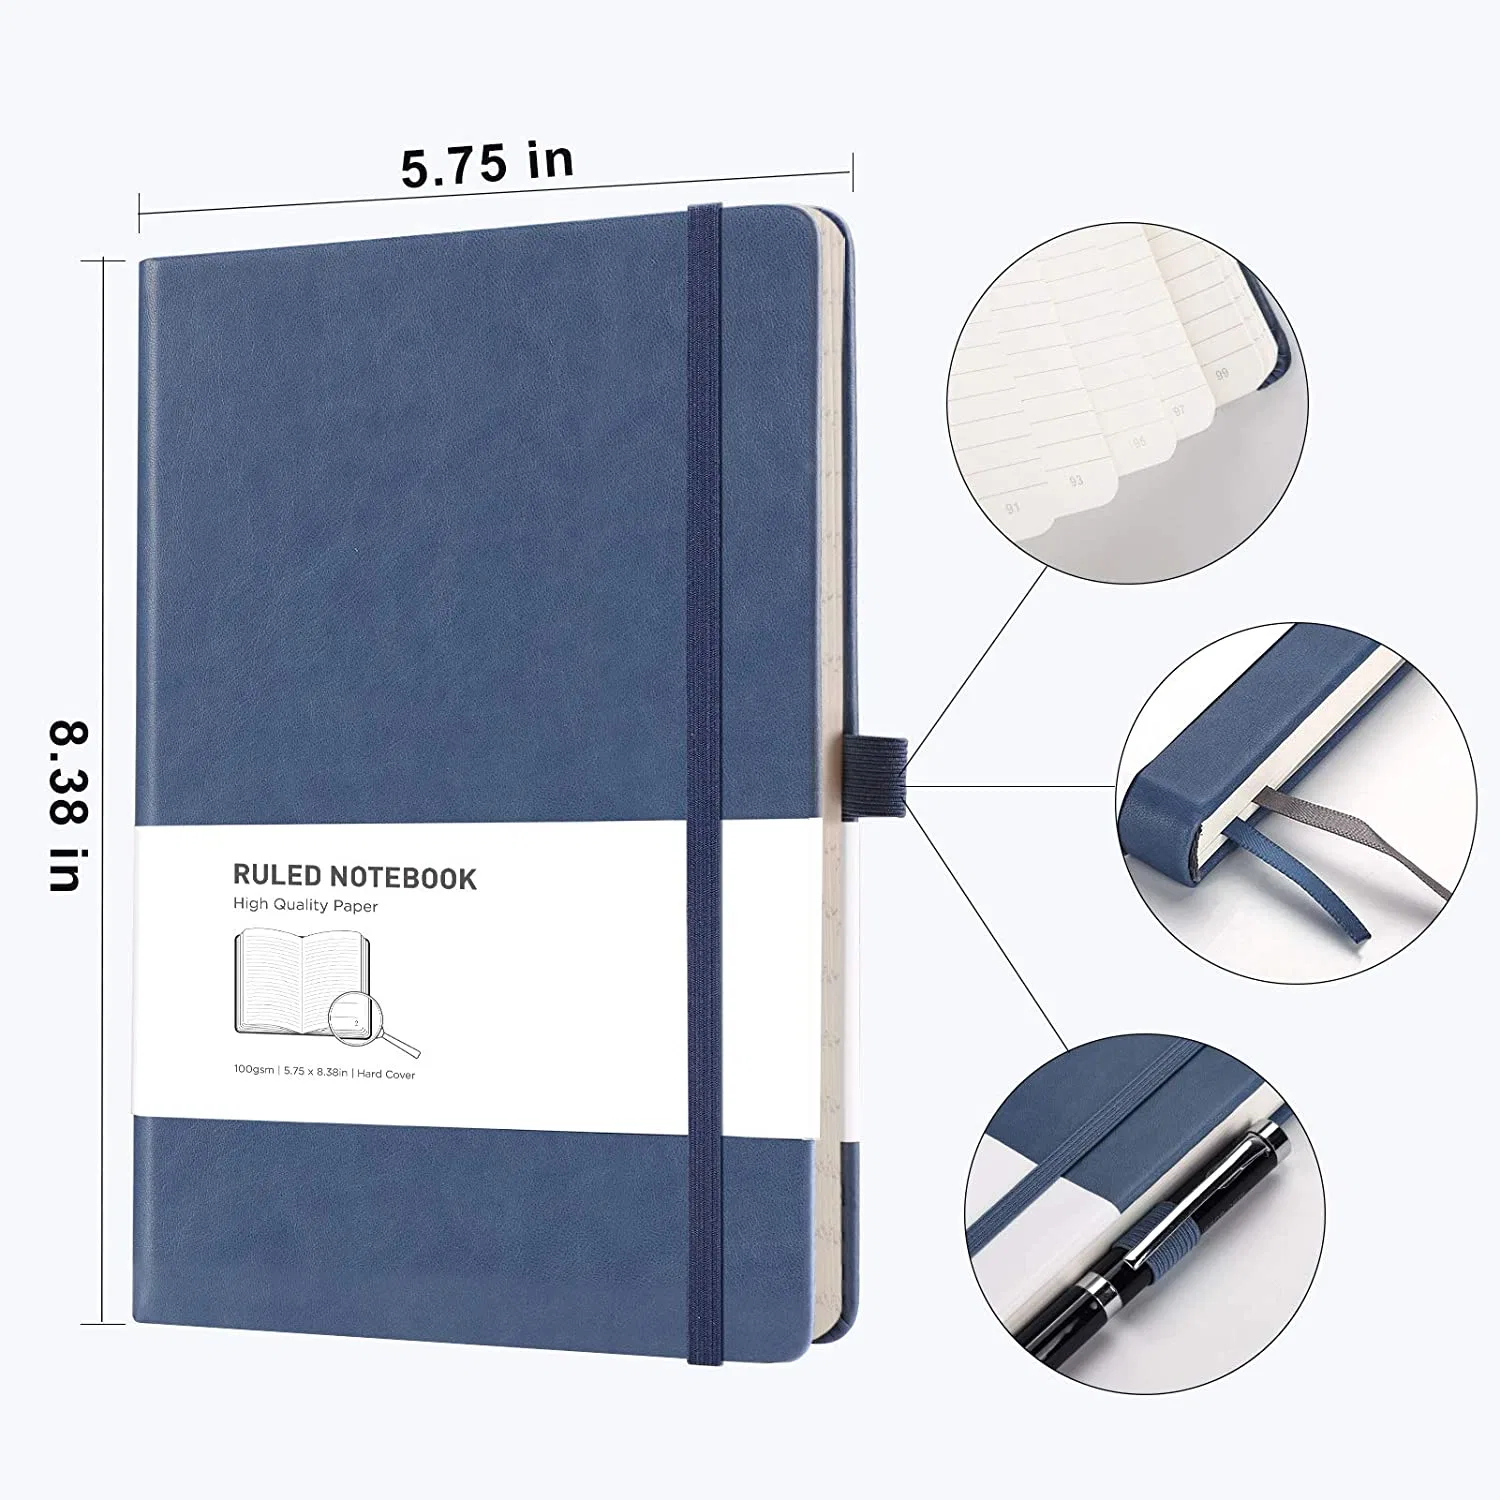 Custom Logo Promotional Work Agenda Budget Business A5 A6 6 Rings Cover Spiral Binder PU Leather Notebook